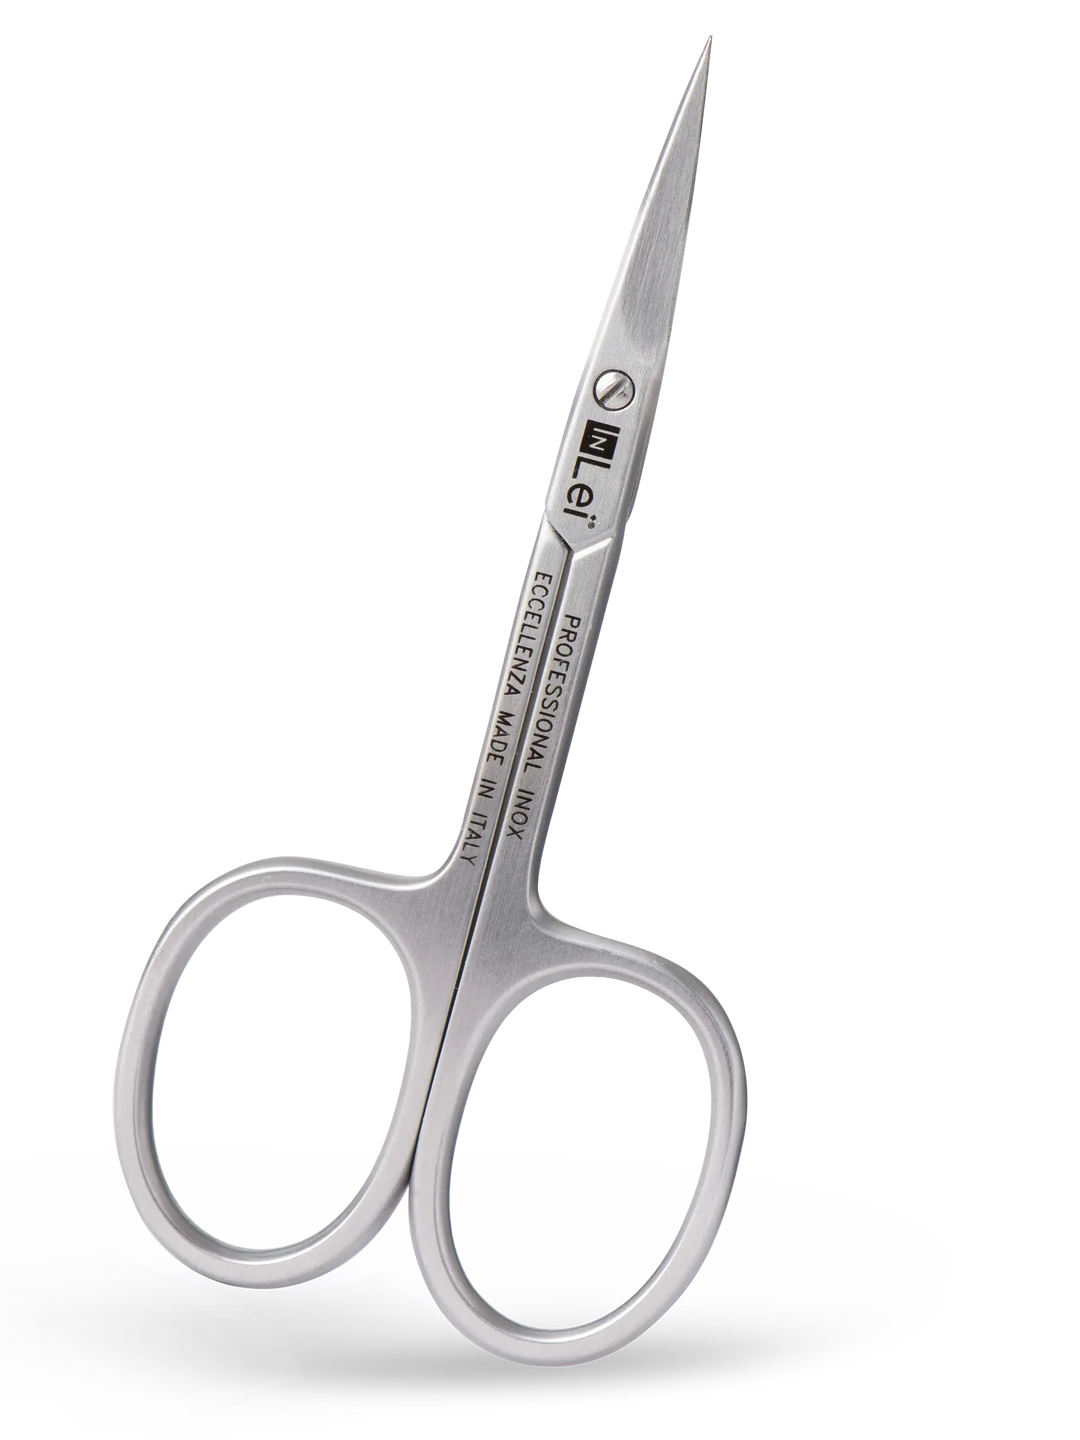 PROFESSIONAL SCISSORS | of the highest quality